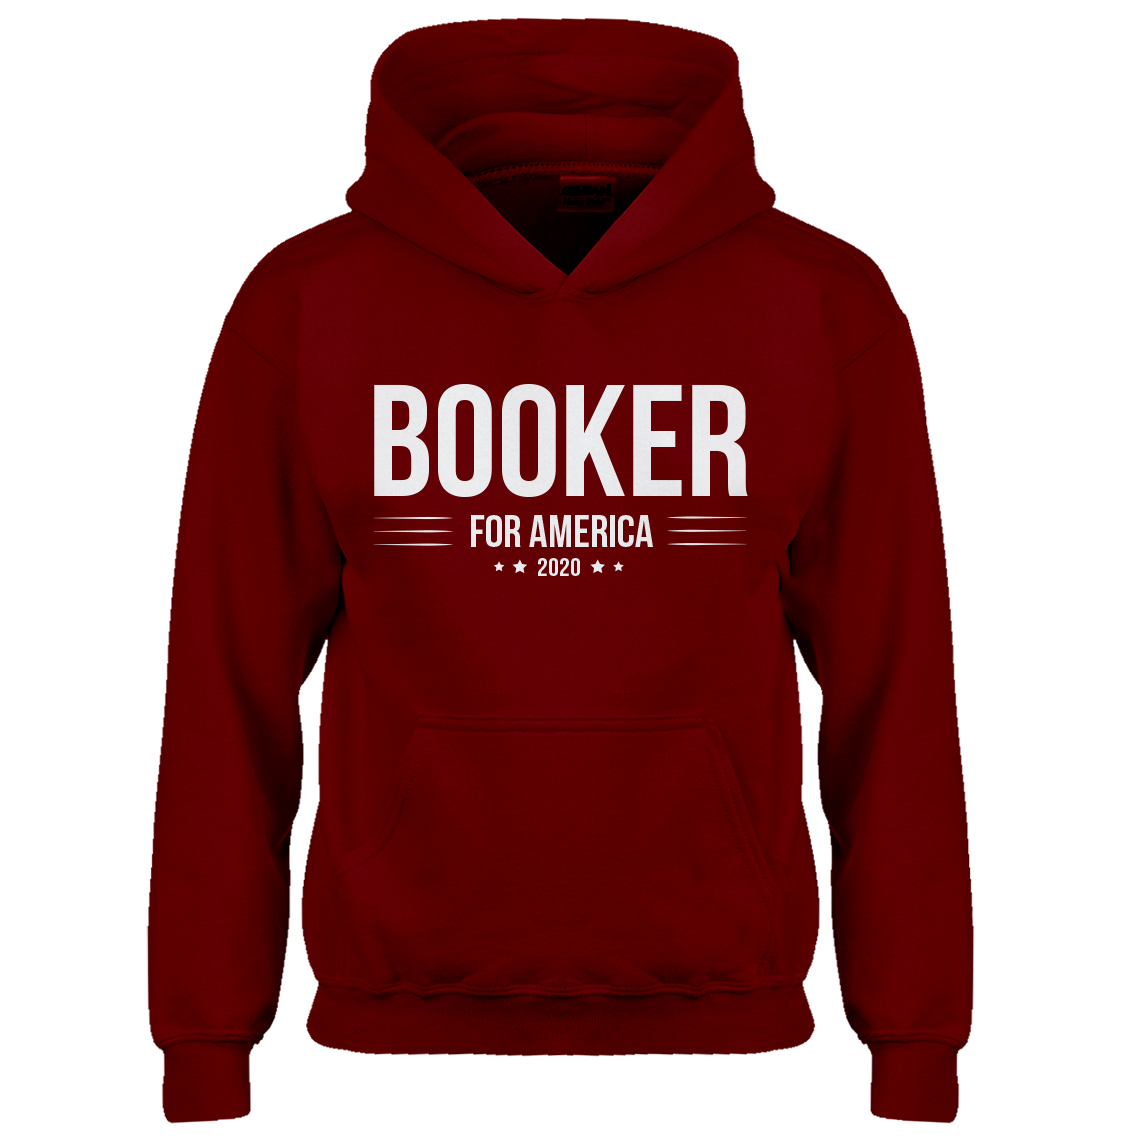 Cory Booker Pullover Hoodie